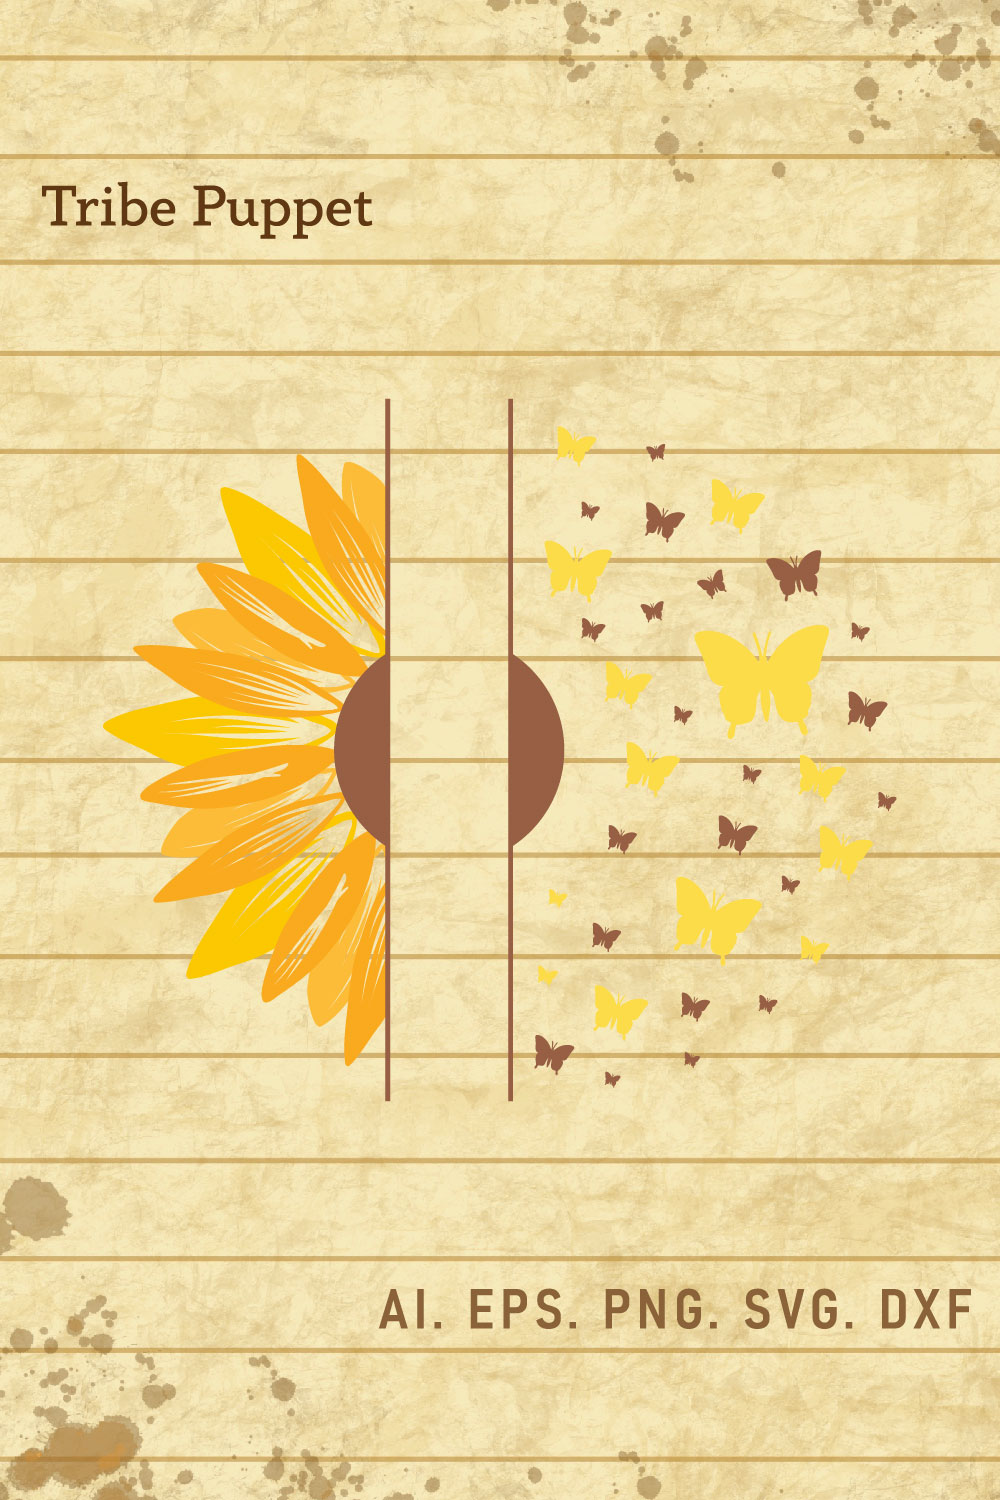 Sunflower 34 pinterest preview image.